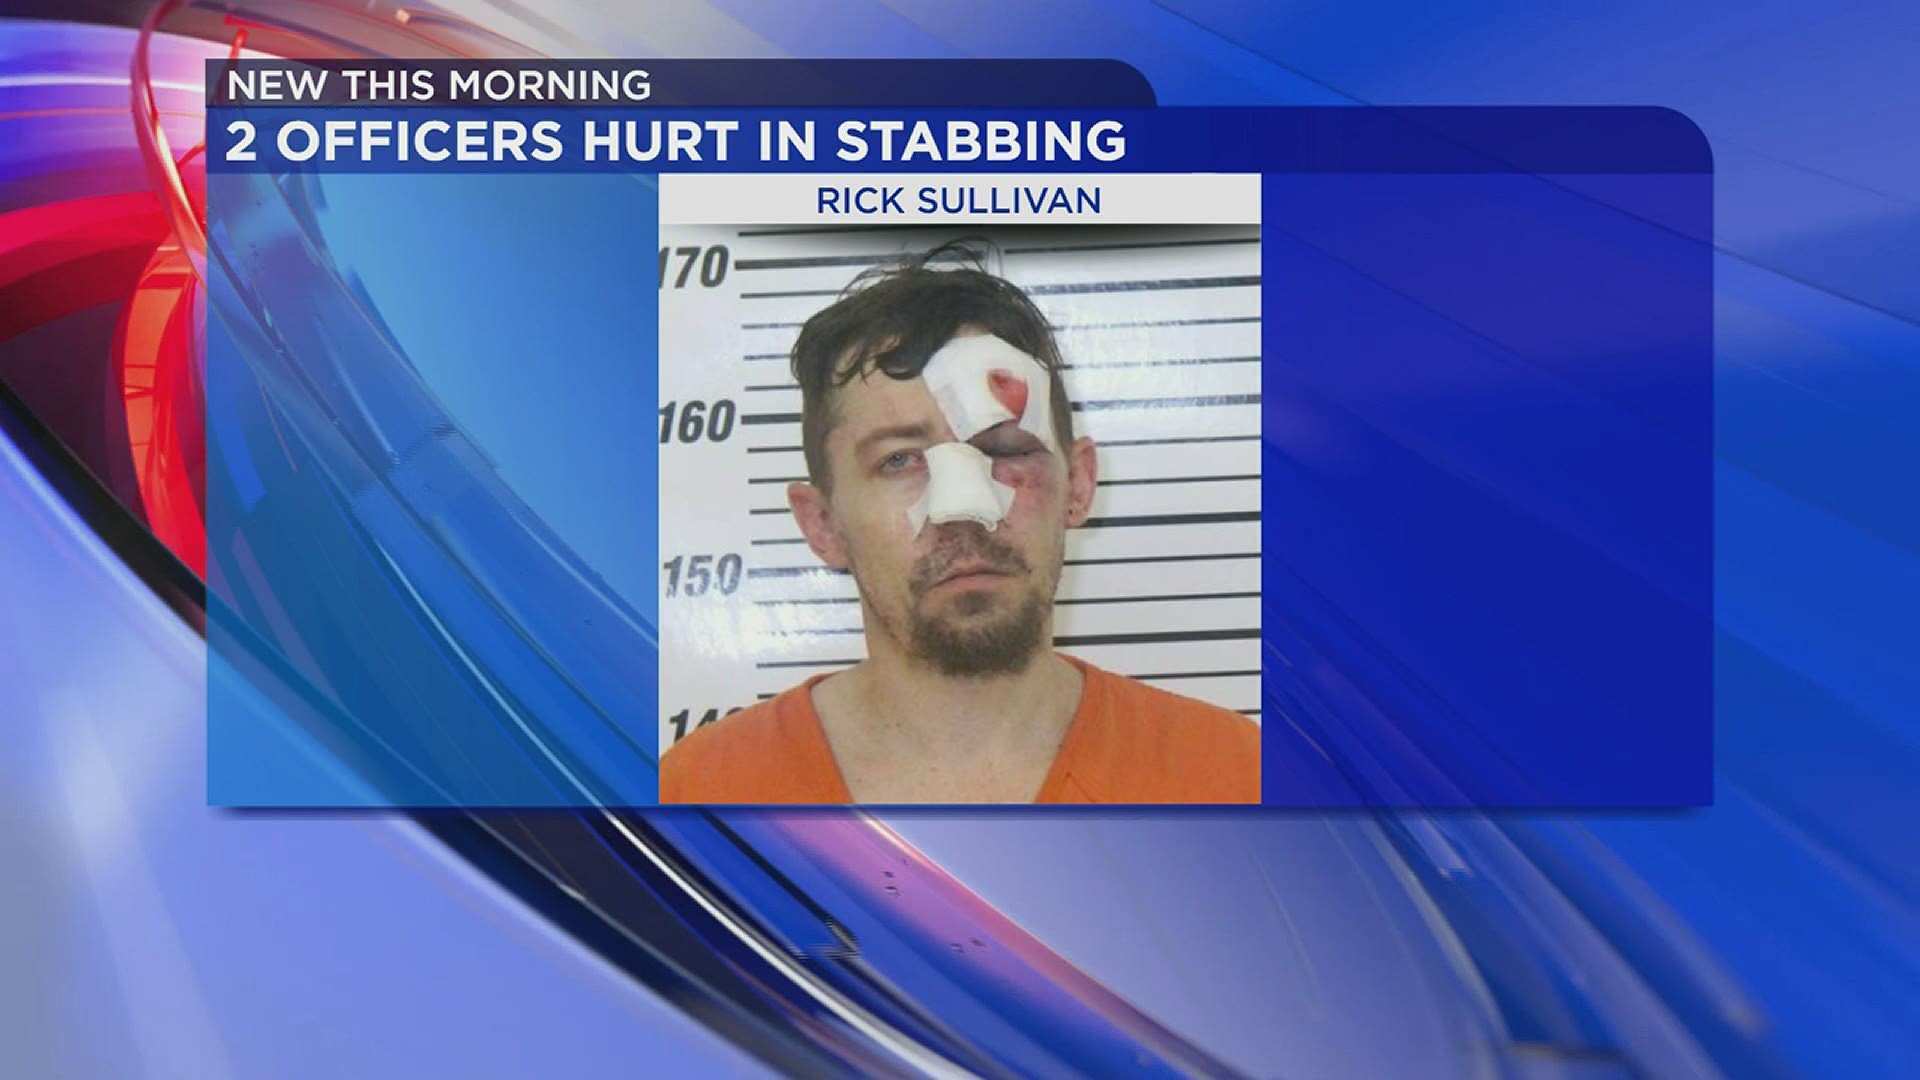 Rick Sullivan was arrested Tuesday, June 30th.